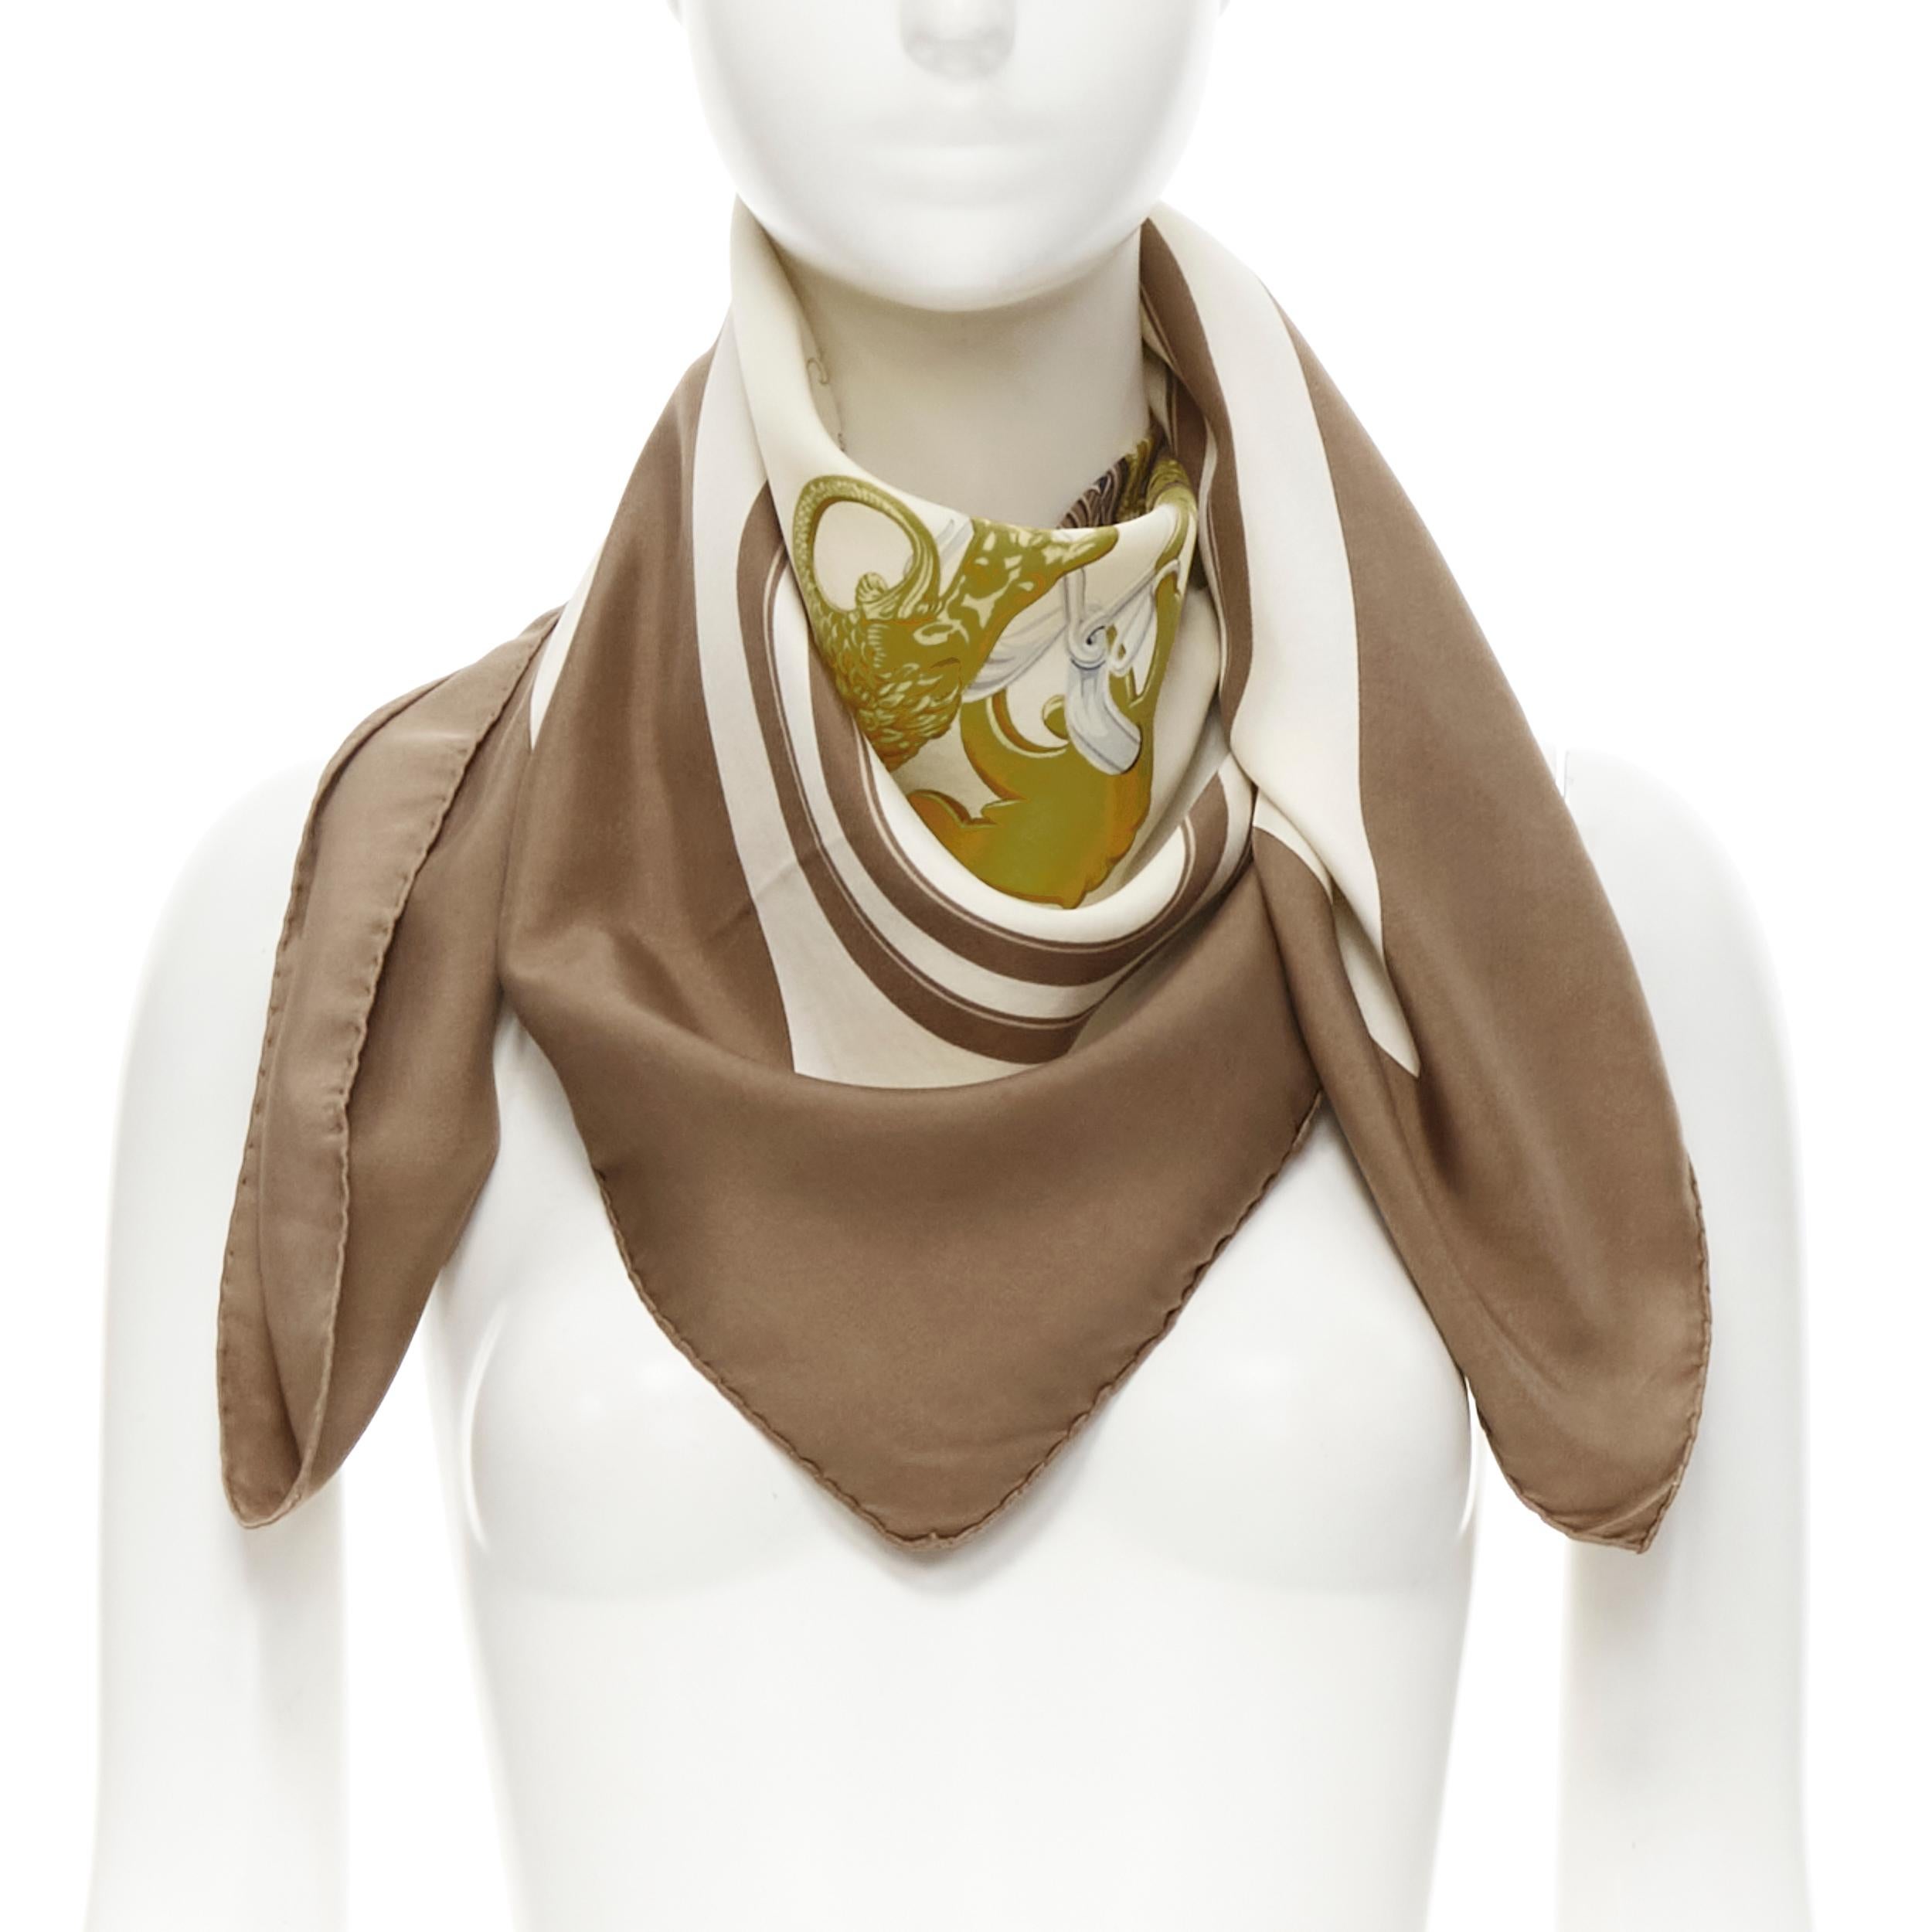 HERMES Hugo Grygkar Brides de Gala brown white print silk scarf 90cm 
Reference: AEMA/A00075 
Brand: Hermes 
Material: Silk 
Color: Brown 

CONDITION: 
Condition: Good, this item was pre-owned and is in good condition. 
Please refer to image gallery